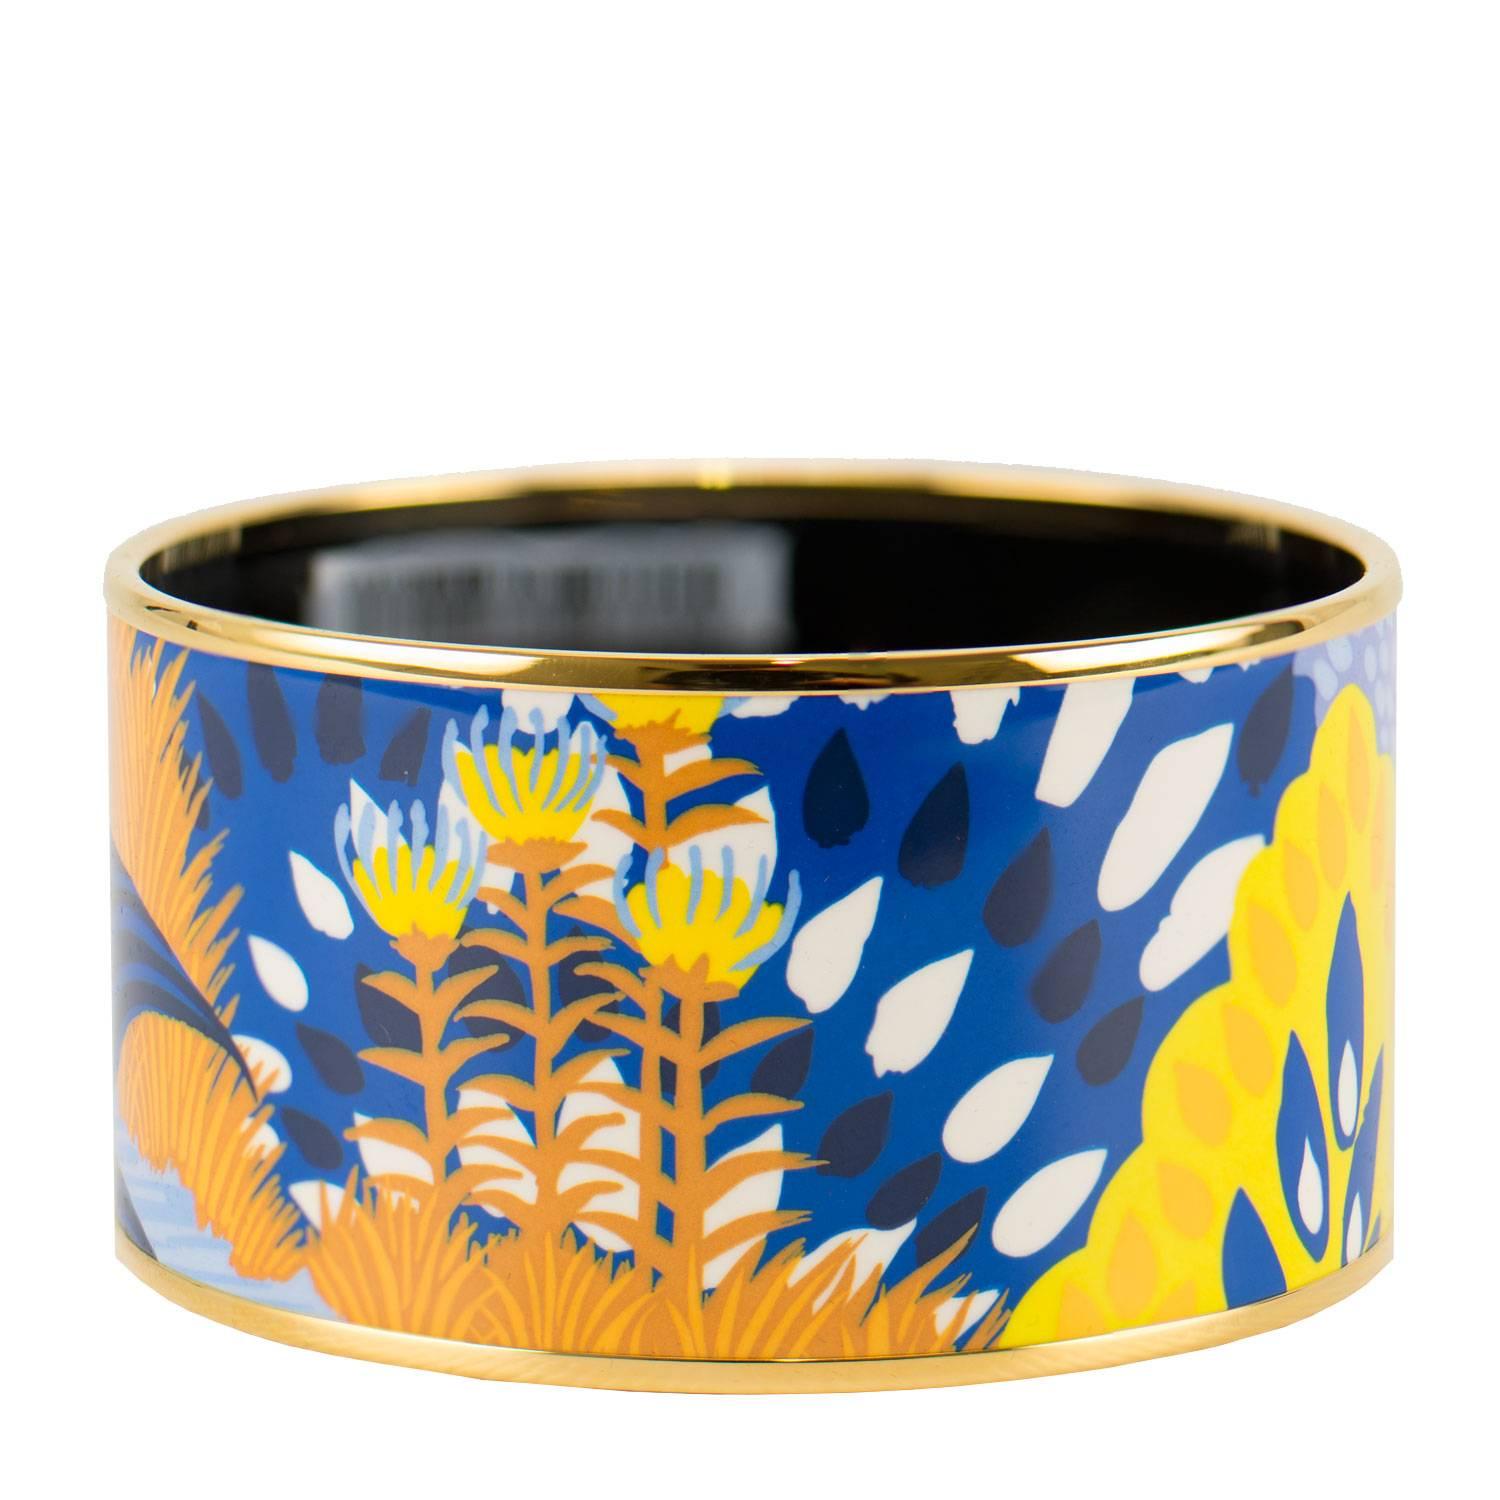 Hermes Bracelet email Jungle of Eden Pollen et Azur plaque Gold XL 2016

Pre-owned and never used.

Bought it in Hermes store in 2016.

Size: XL.

Diameter: 6.5cm

Color: Pollen et Azur.

Model: Jungle of Eden.

Details:
*Protective